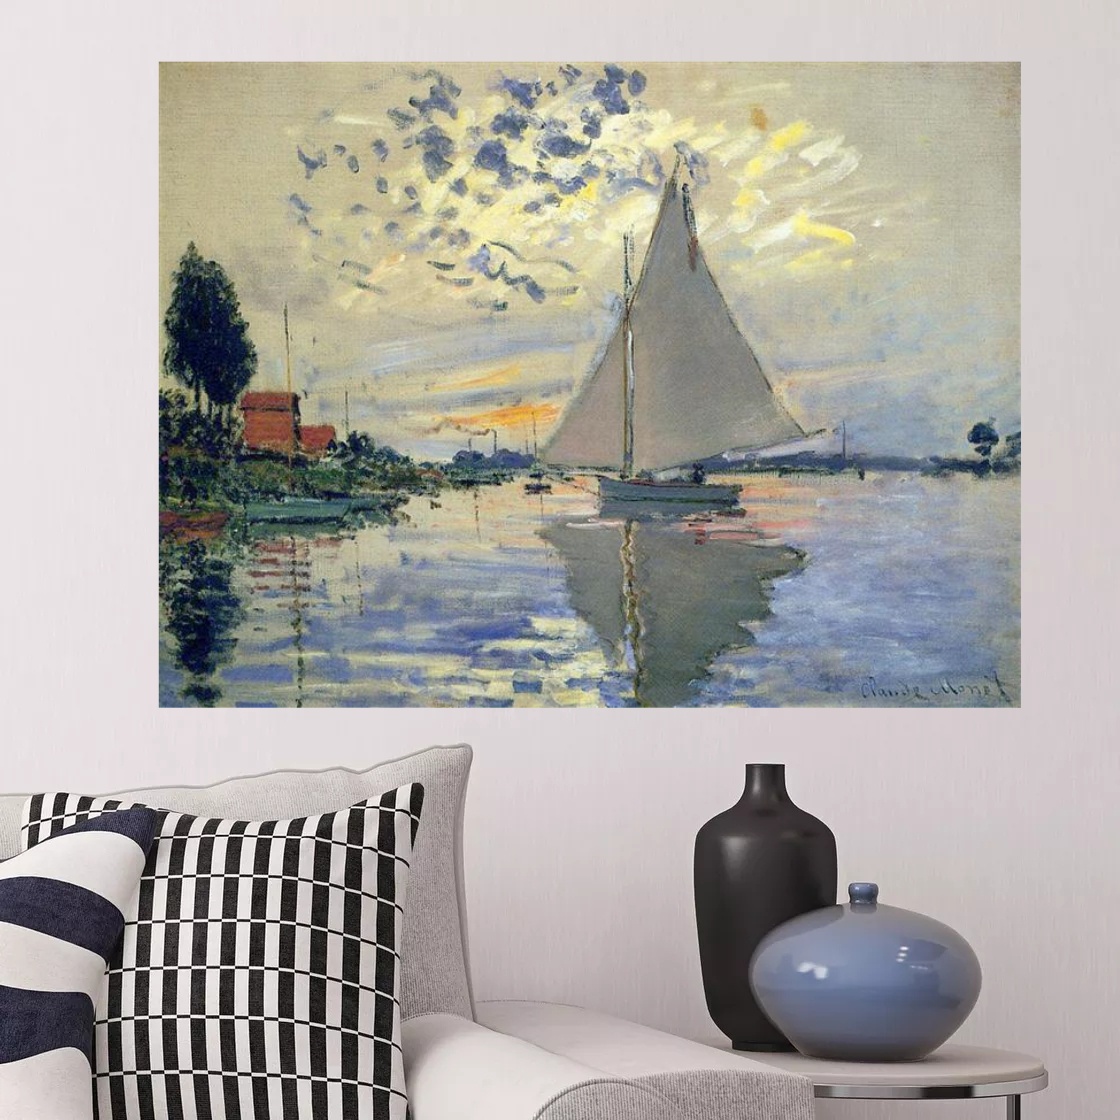 Sailboat at Le Petit-Gennevilliers by Claude Monet Painting on Canvas Replica Landscape Oil Art for Office Room Decoration Handpainted Impressionism